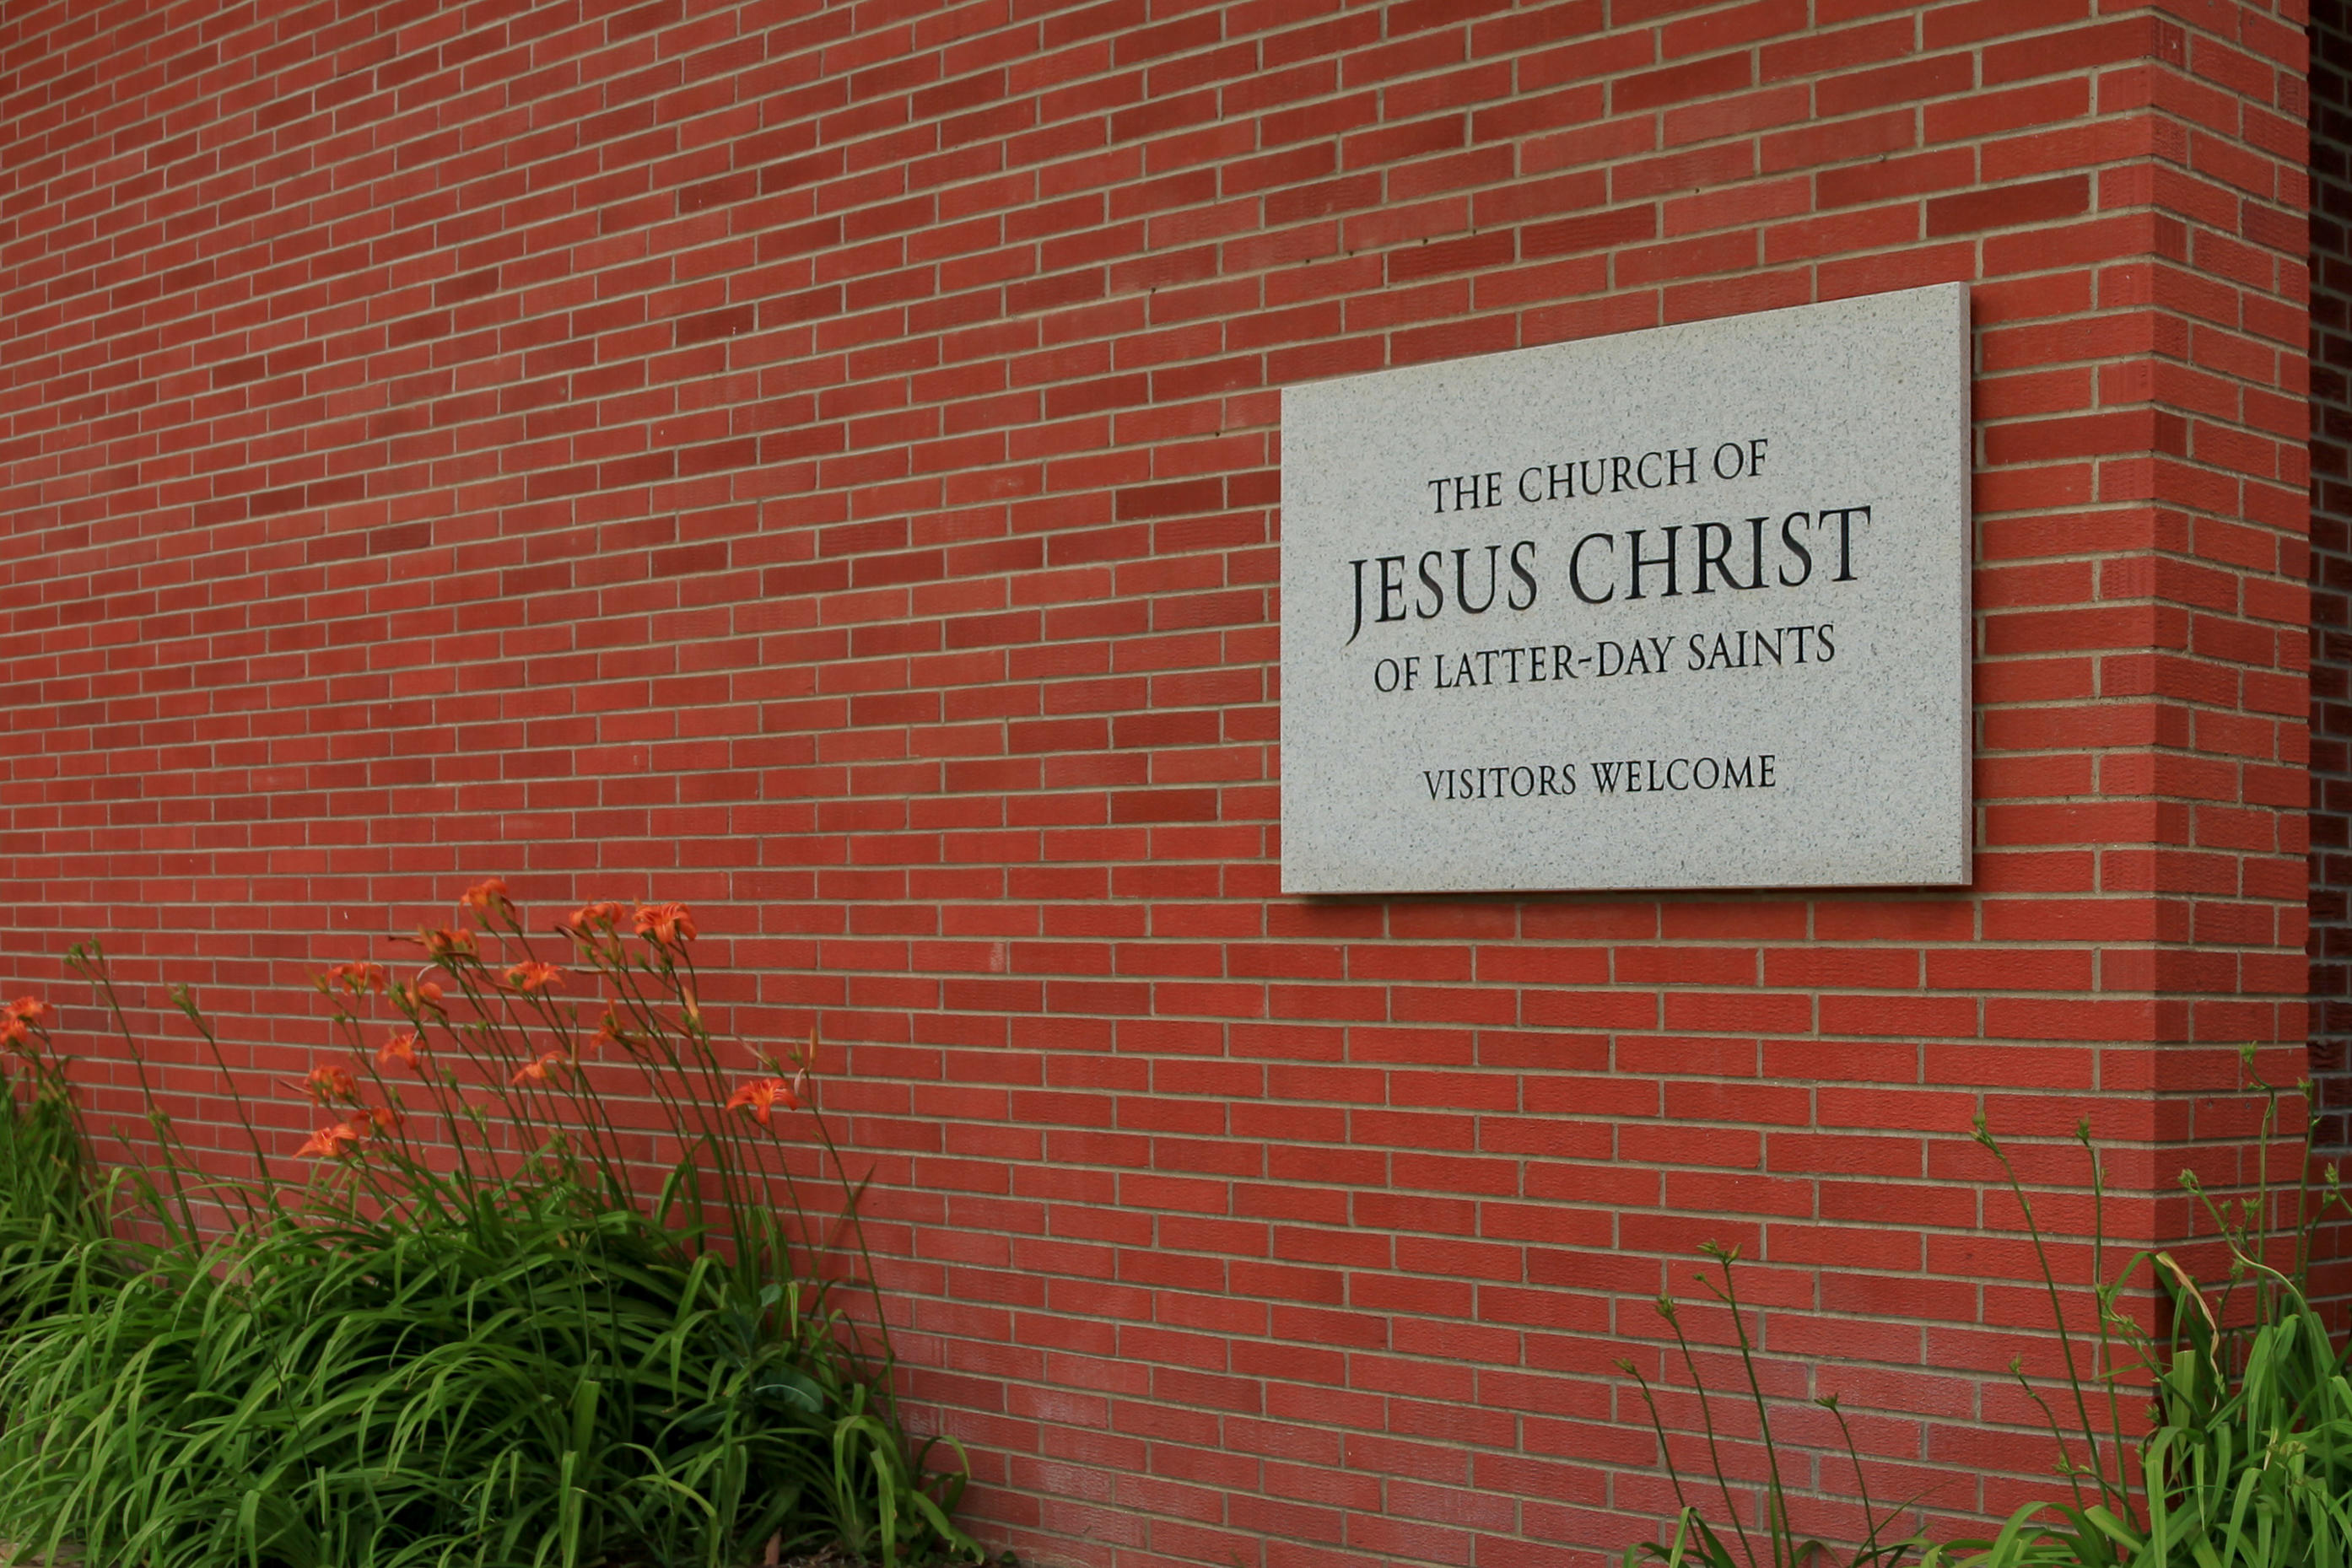 The Church of Jesus Christ of Latter-day Saints, Wolf Point MT 59201